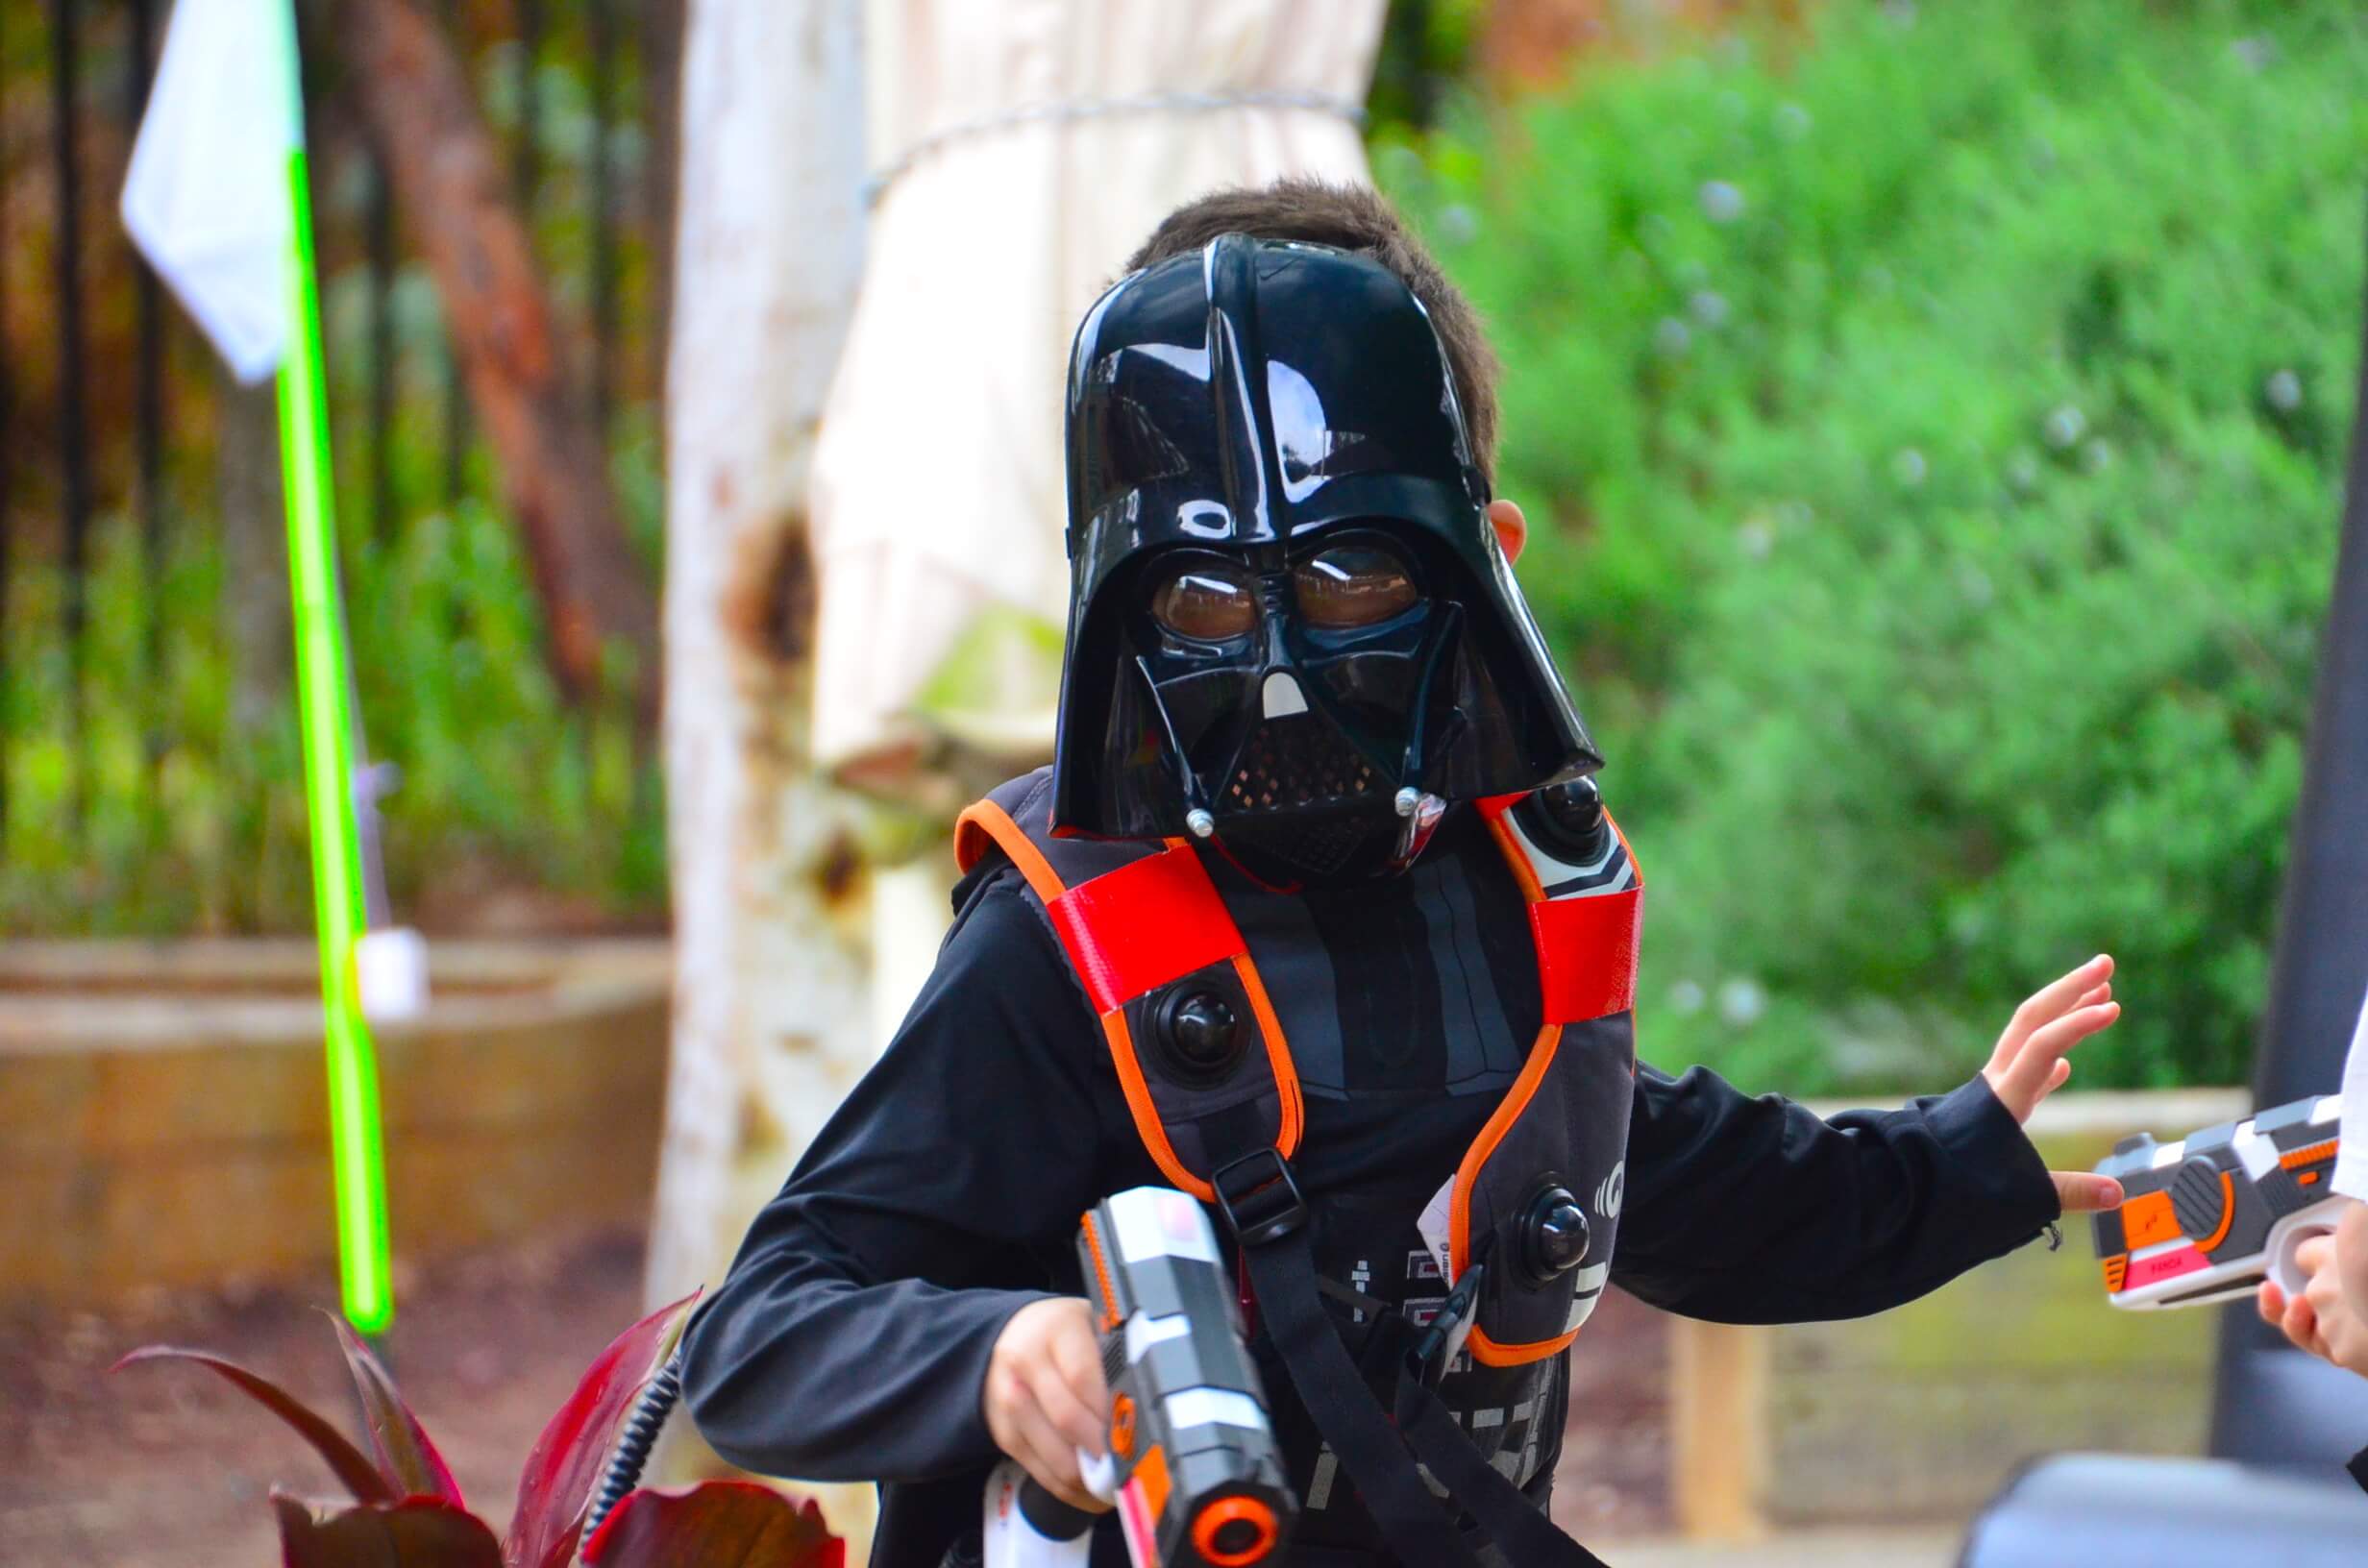 star wars laser tag party for kids birthday